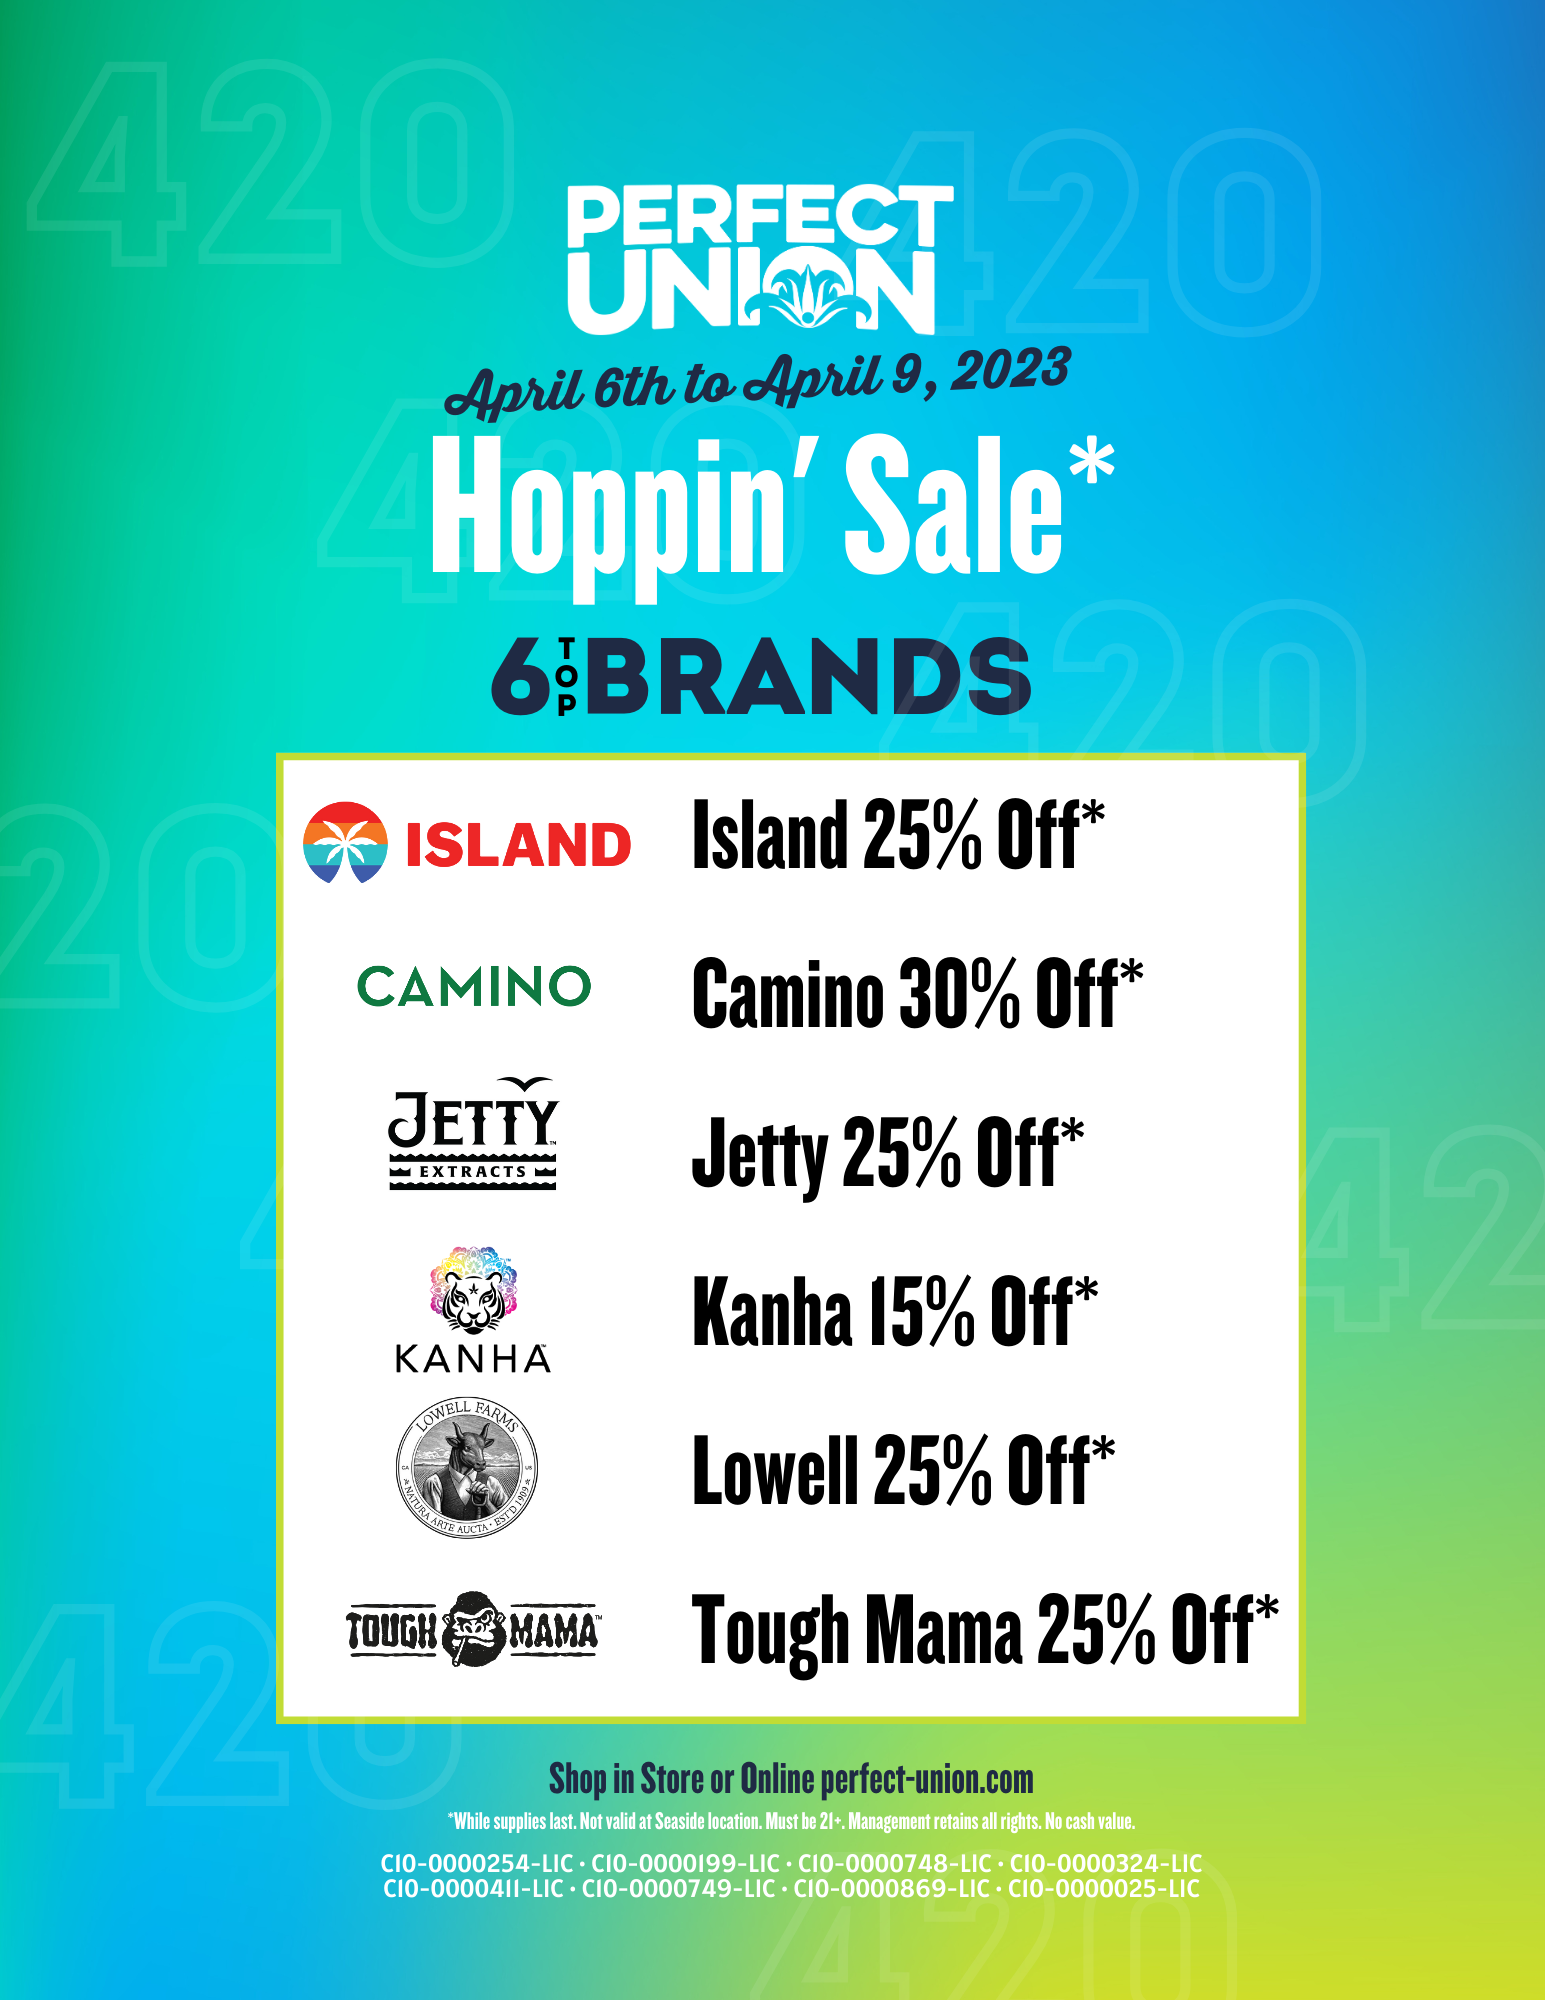 04.06.2023 t0 04.09.2023 Hoppin Sale at Perfect Union with 6 top brands on sale